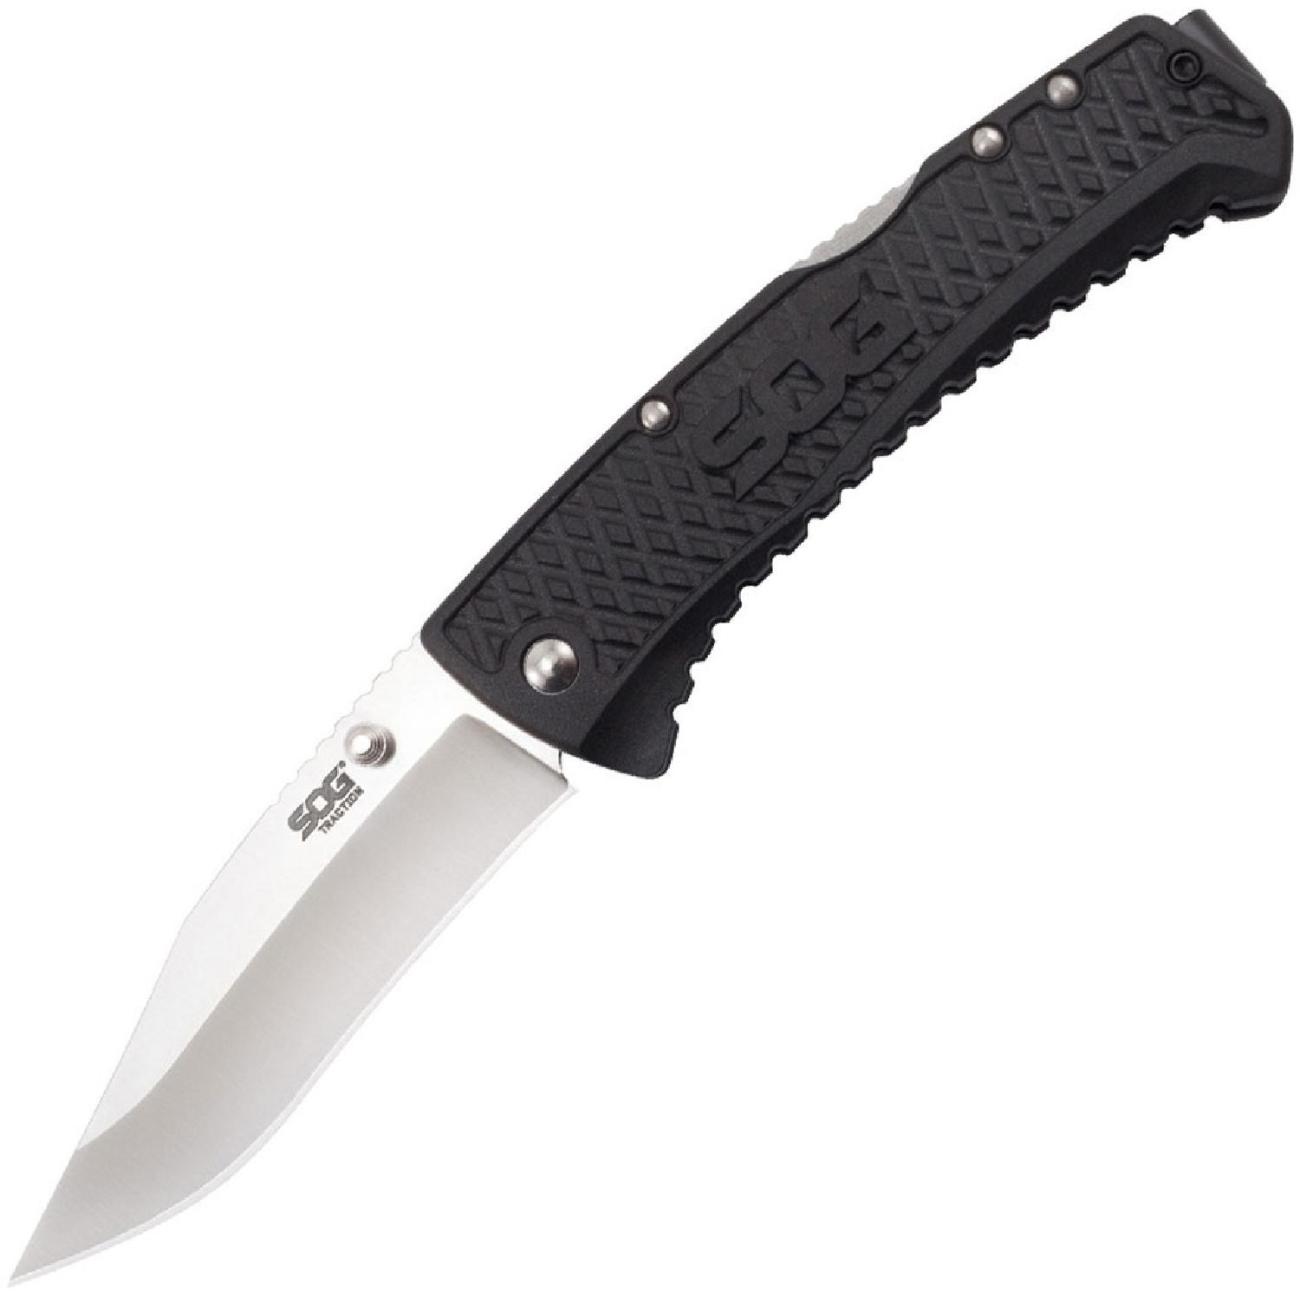 Traction Folding Knife - Clip Point SOG